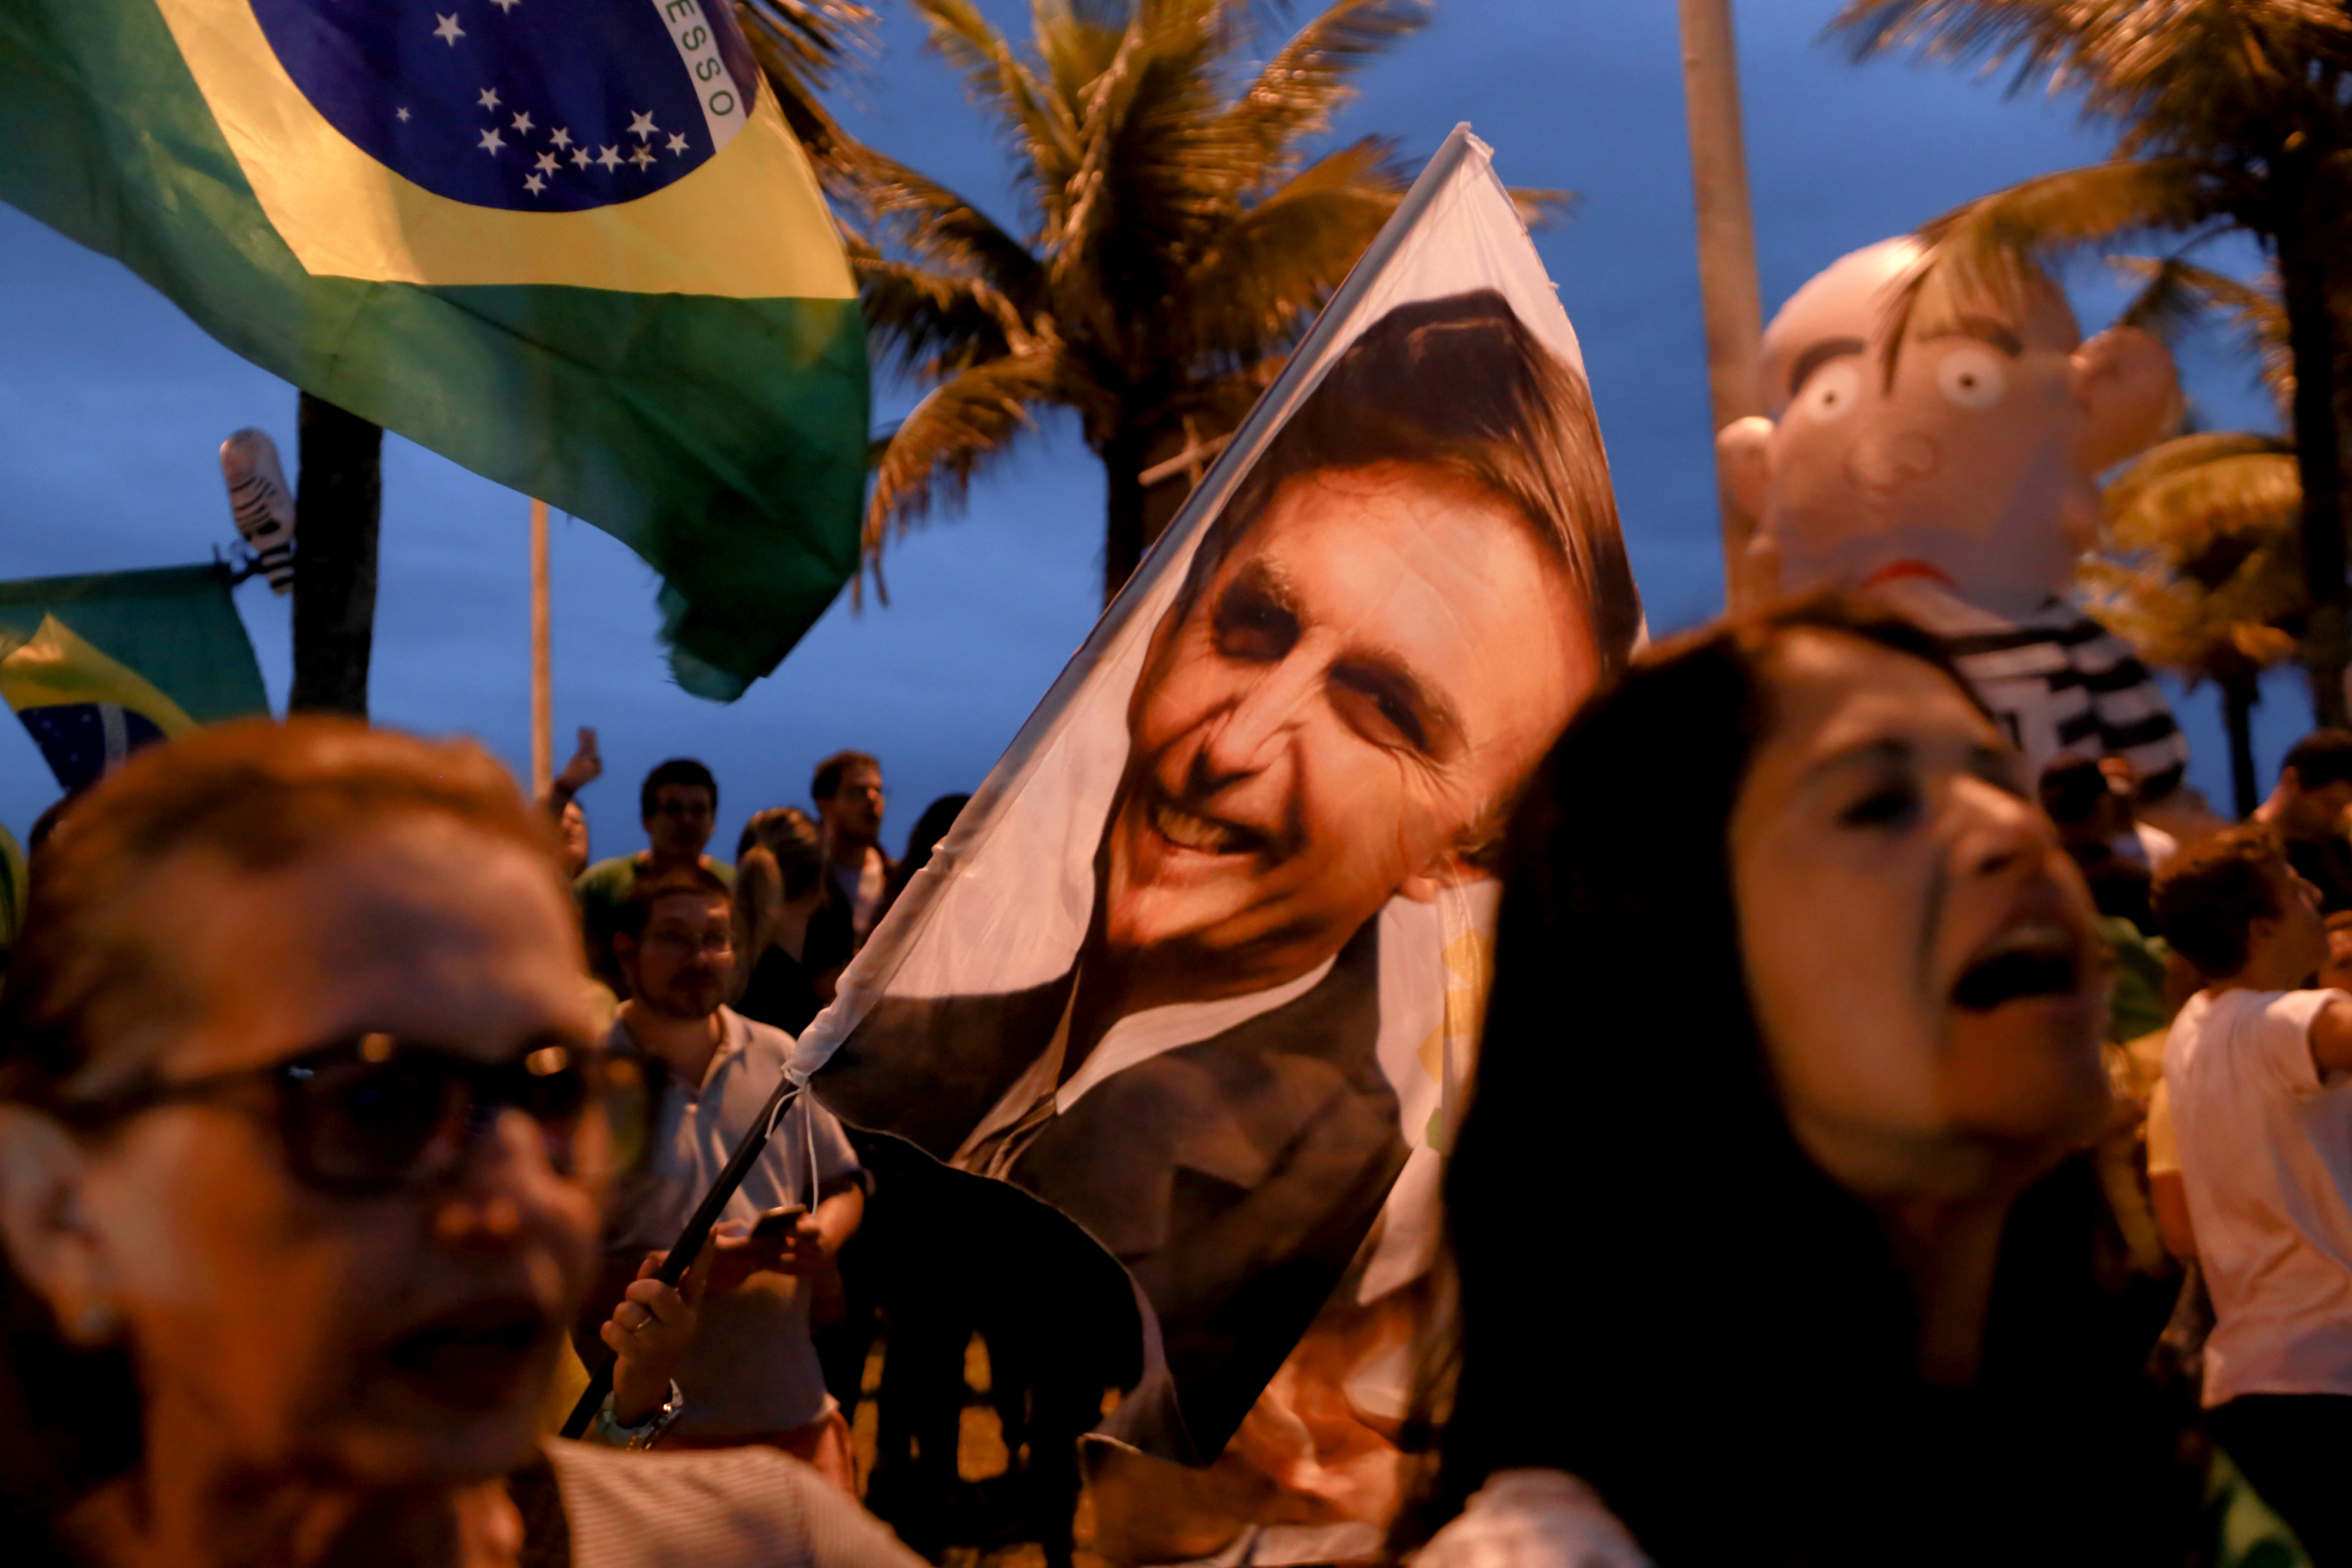 Will Brazil’s new government respect human rights and protect the environment?